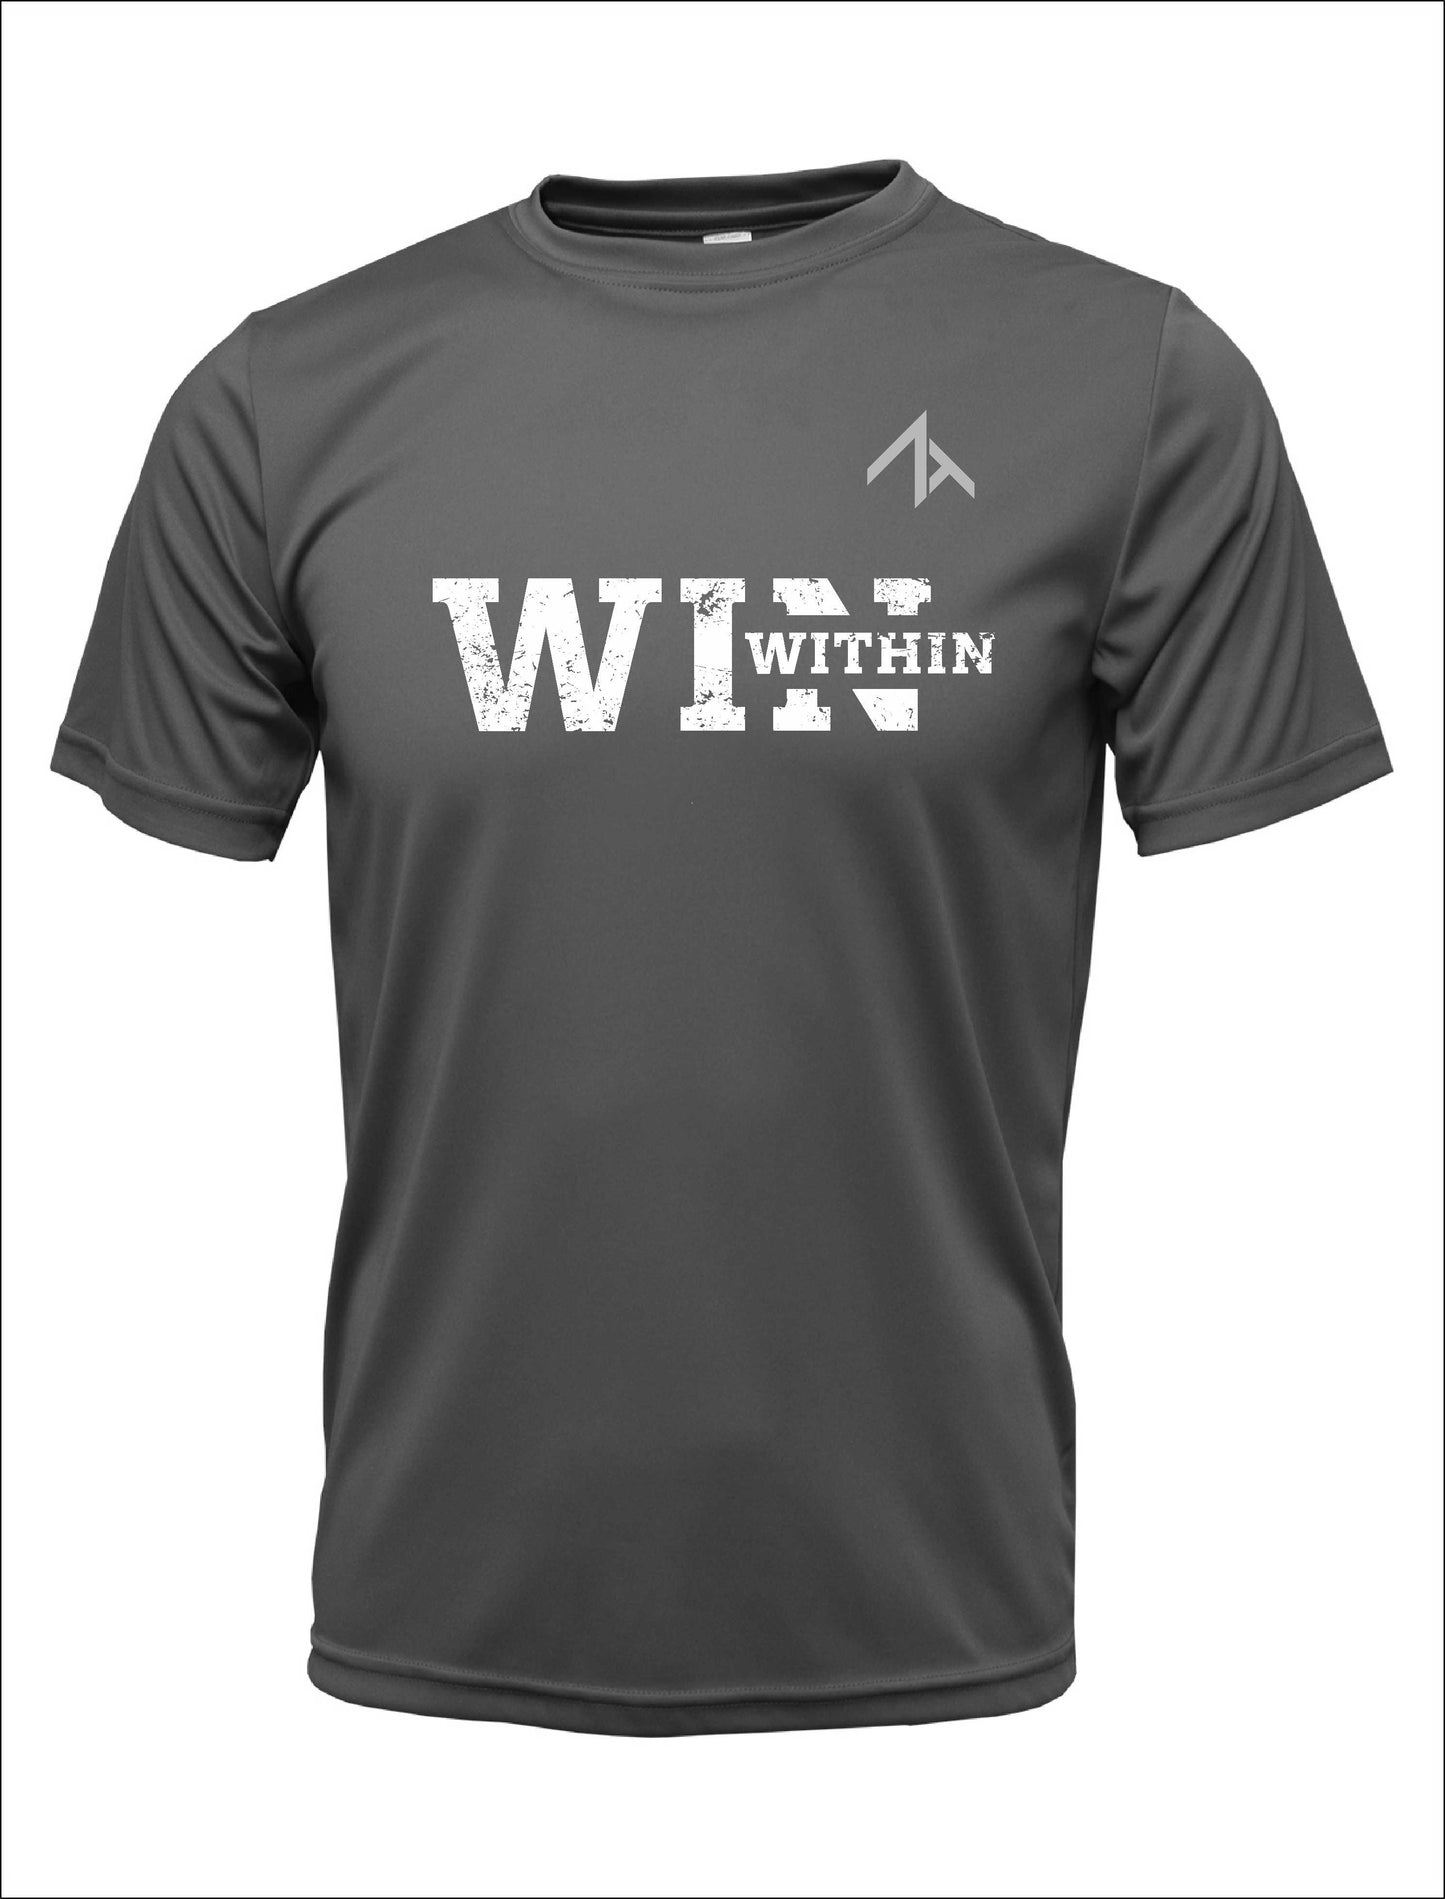 Short Sleeve "WIN WITHIN" Cotton T-Shirt